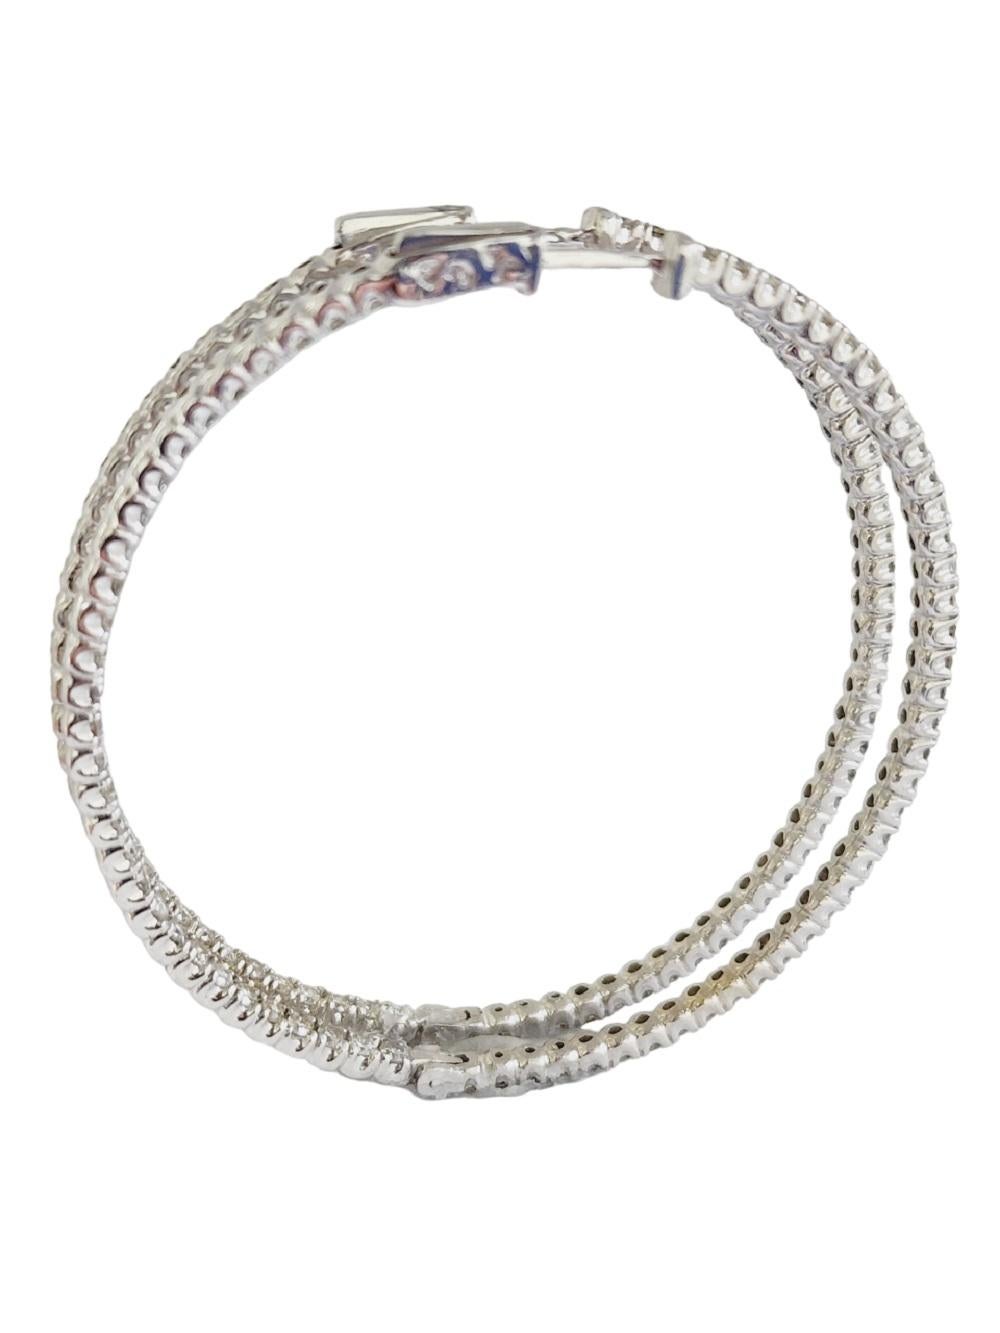 Beautiful pair of natural diamond large inside out hoop earrings in 14K white gold. Secures with snap closure for wear. 
Average Color I, Clarity SI, 
Measures 2 inch x 2 inch diameter. 